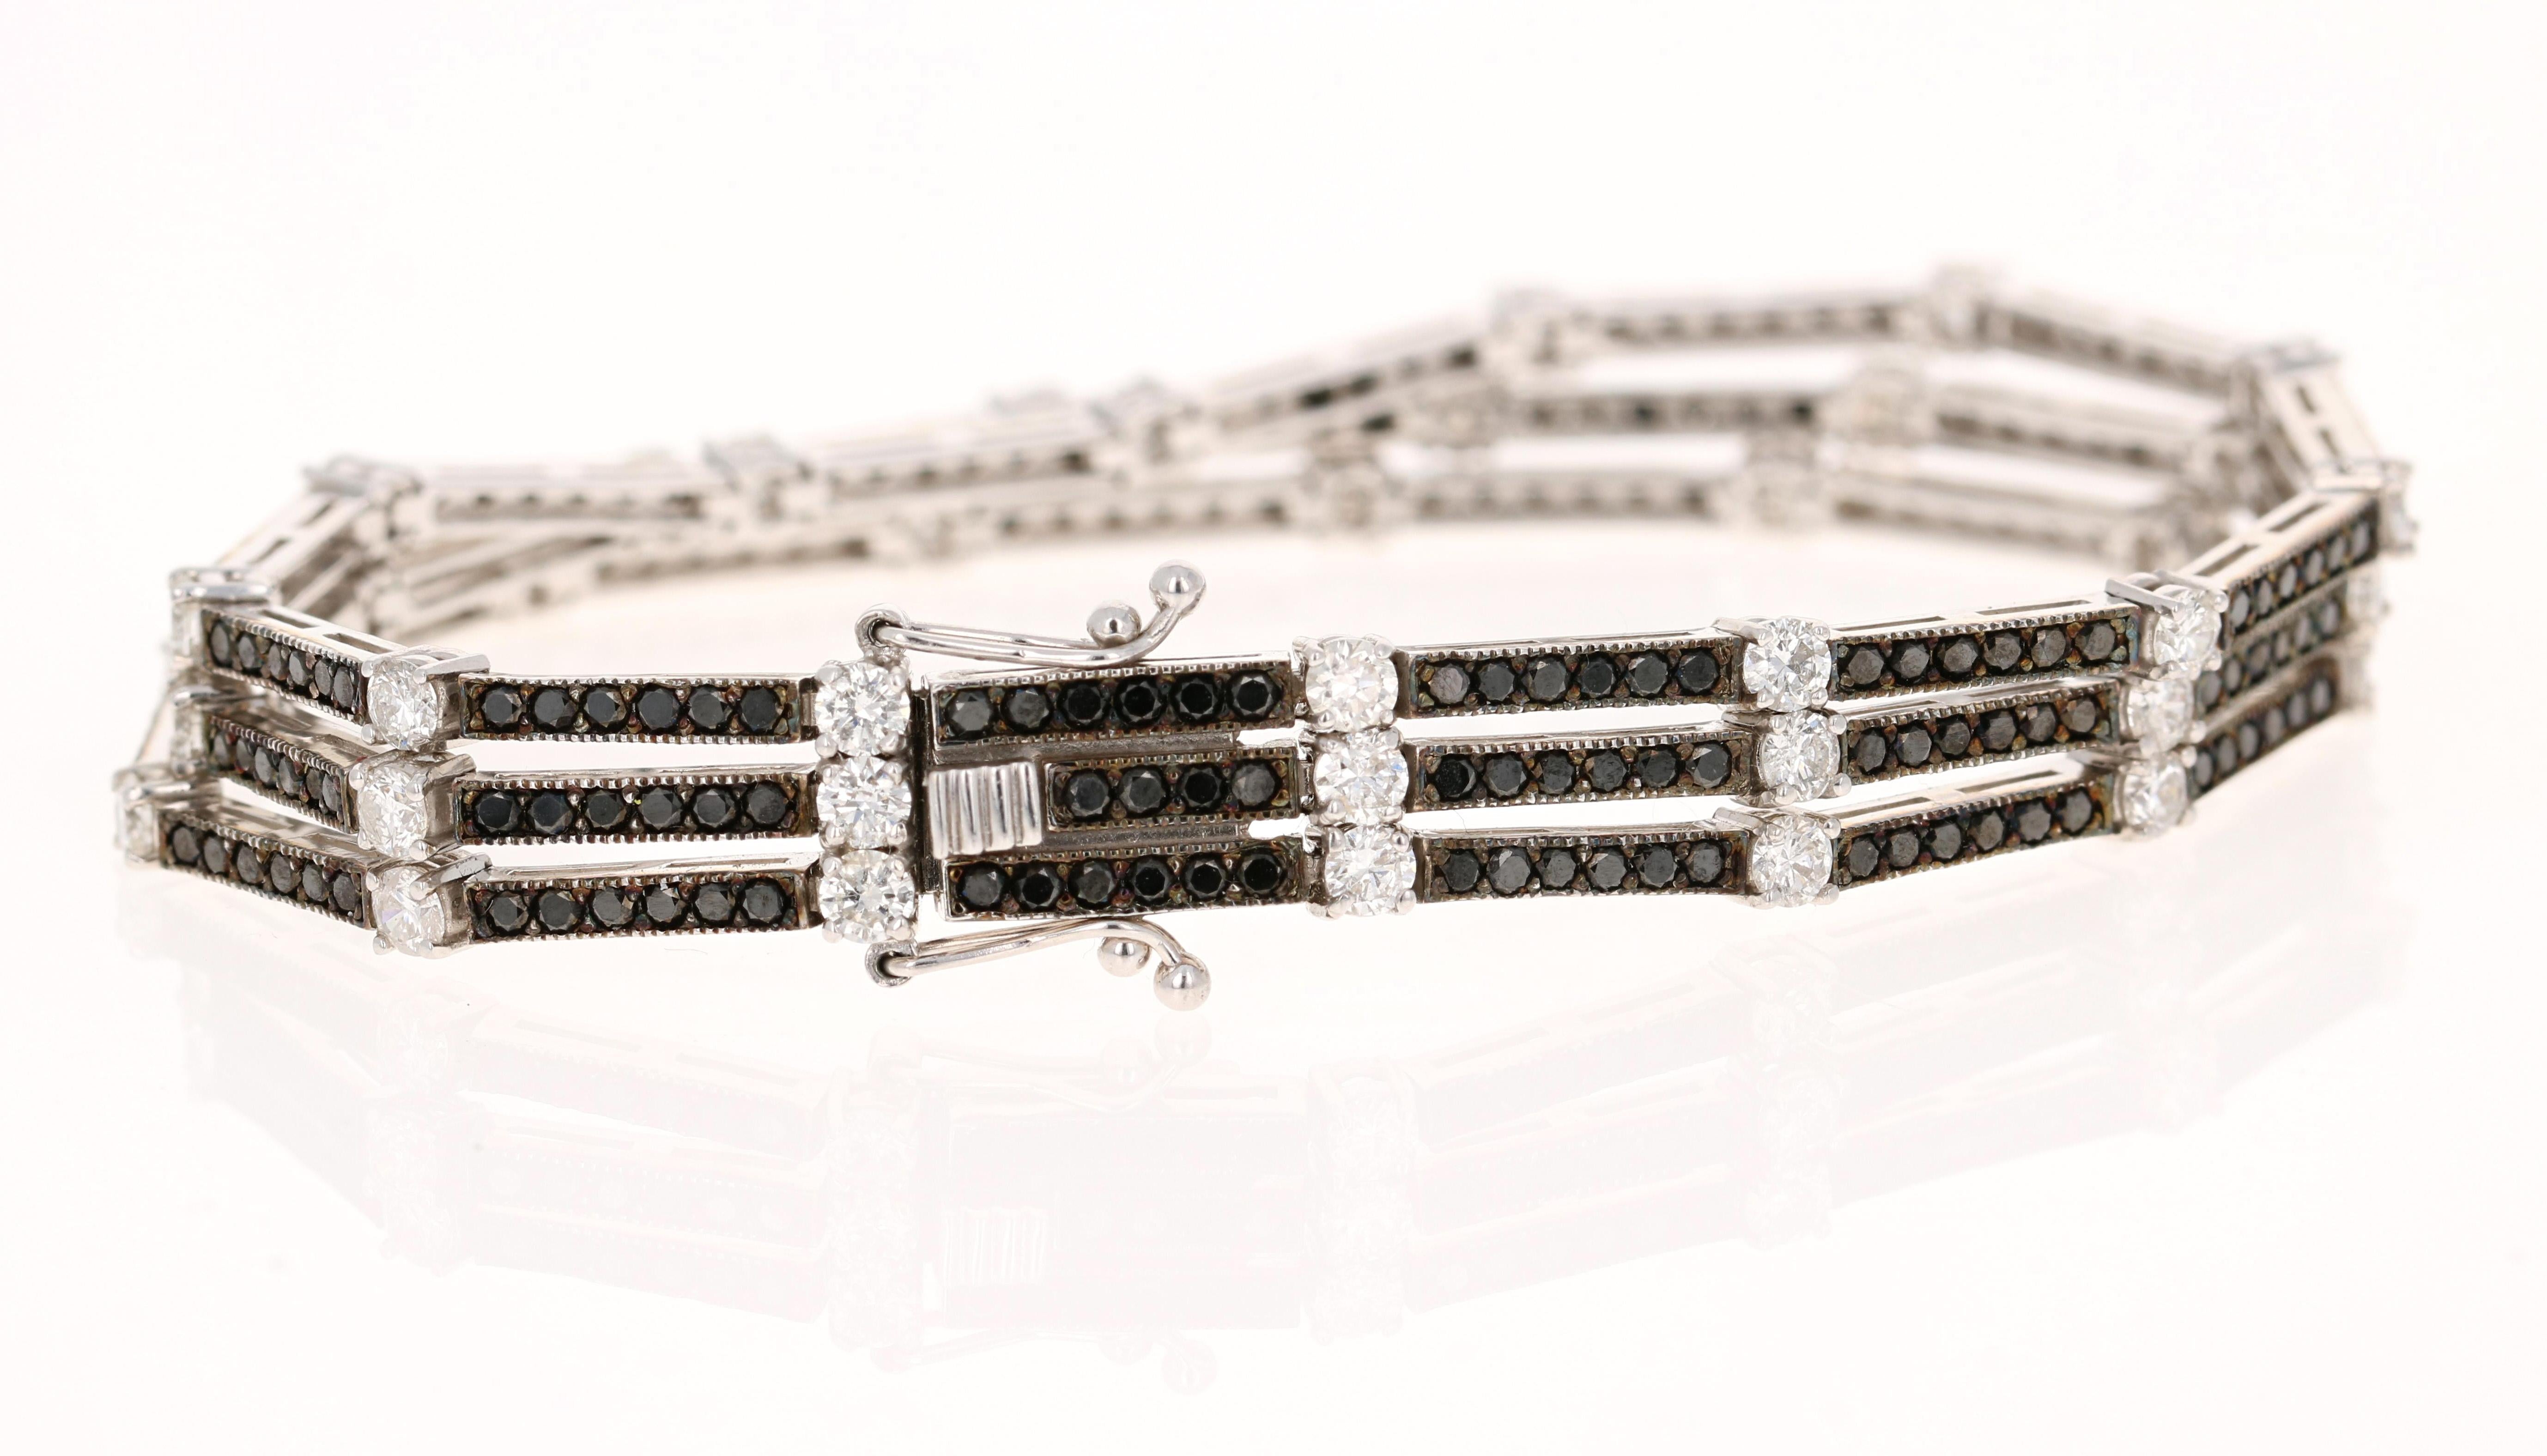 This bracelet has 233 Black Round Cut Diamonds that weigh 3.74 carats and 39 Round Cut Diamonds that weigh 3.08 carats. The total carat weight of the ring is 6.82 carats.

It is set in 14 Karat White Gold and has an approximate gold gram of 18.4